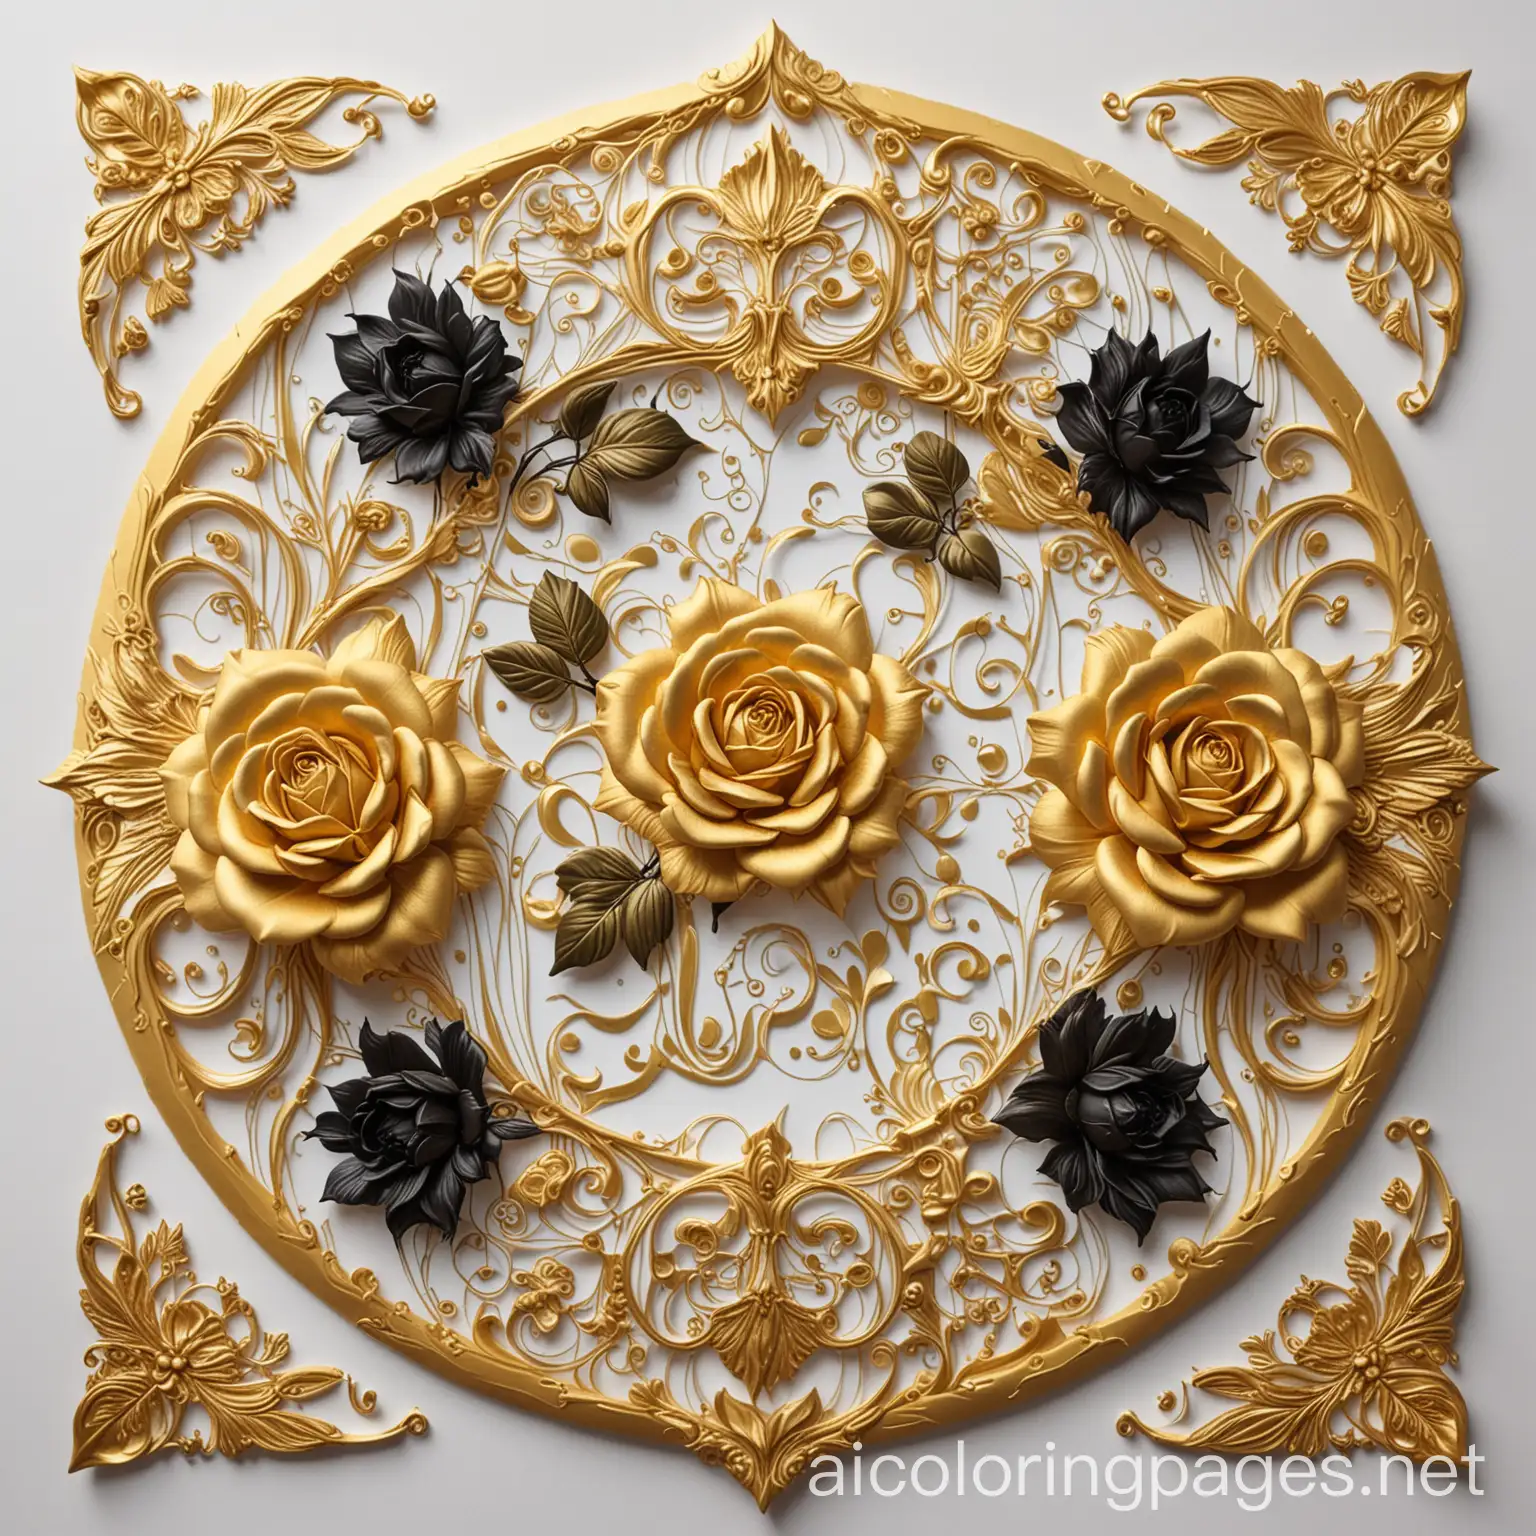 Gold-NADA-surrounded-by-Black-and-Gold-Roses-Realistic-3D-Coloring-Page